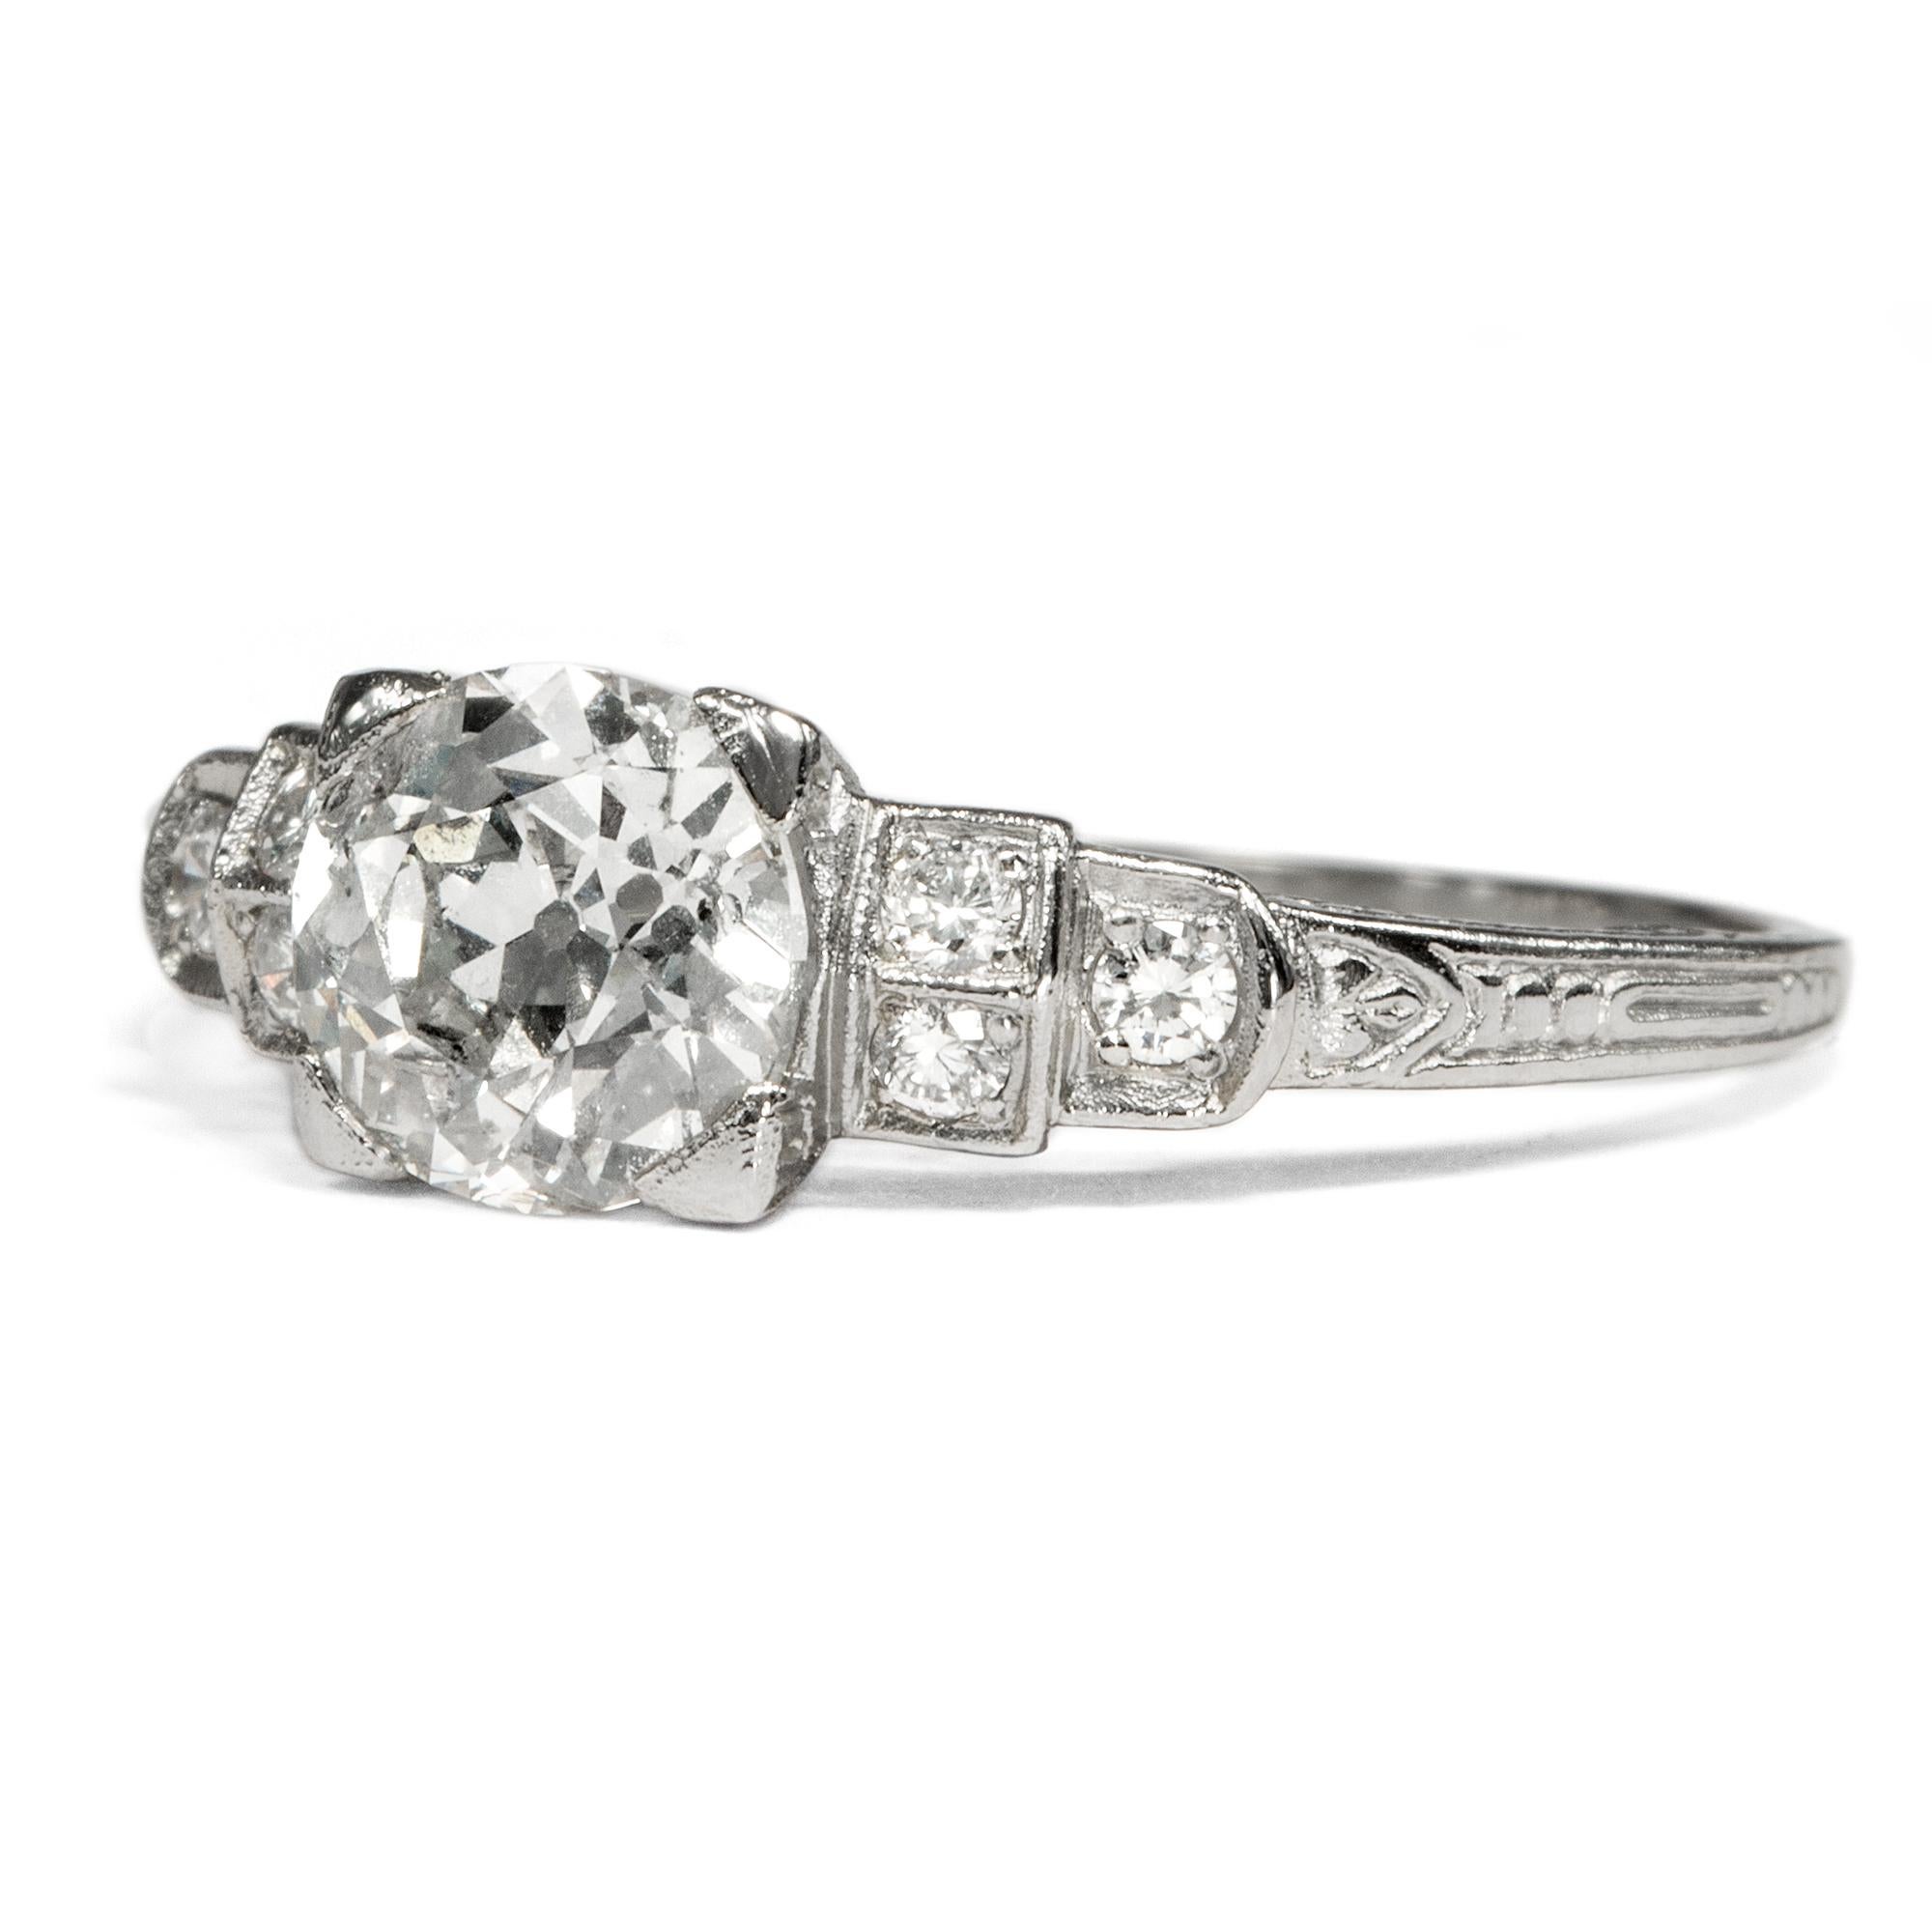 Art Deco Certified 1.24 Carat Antique Old European Cut Diamond in a Contemporary Ring